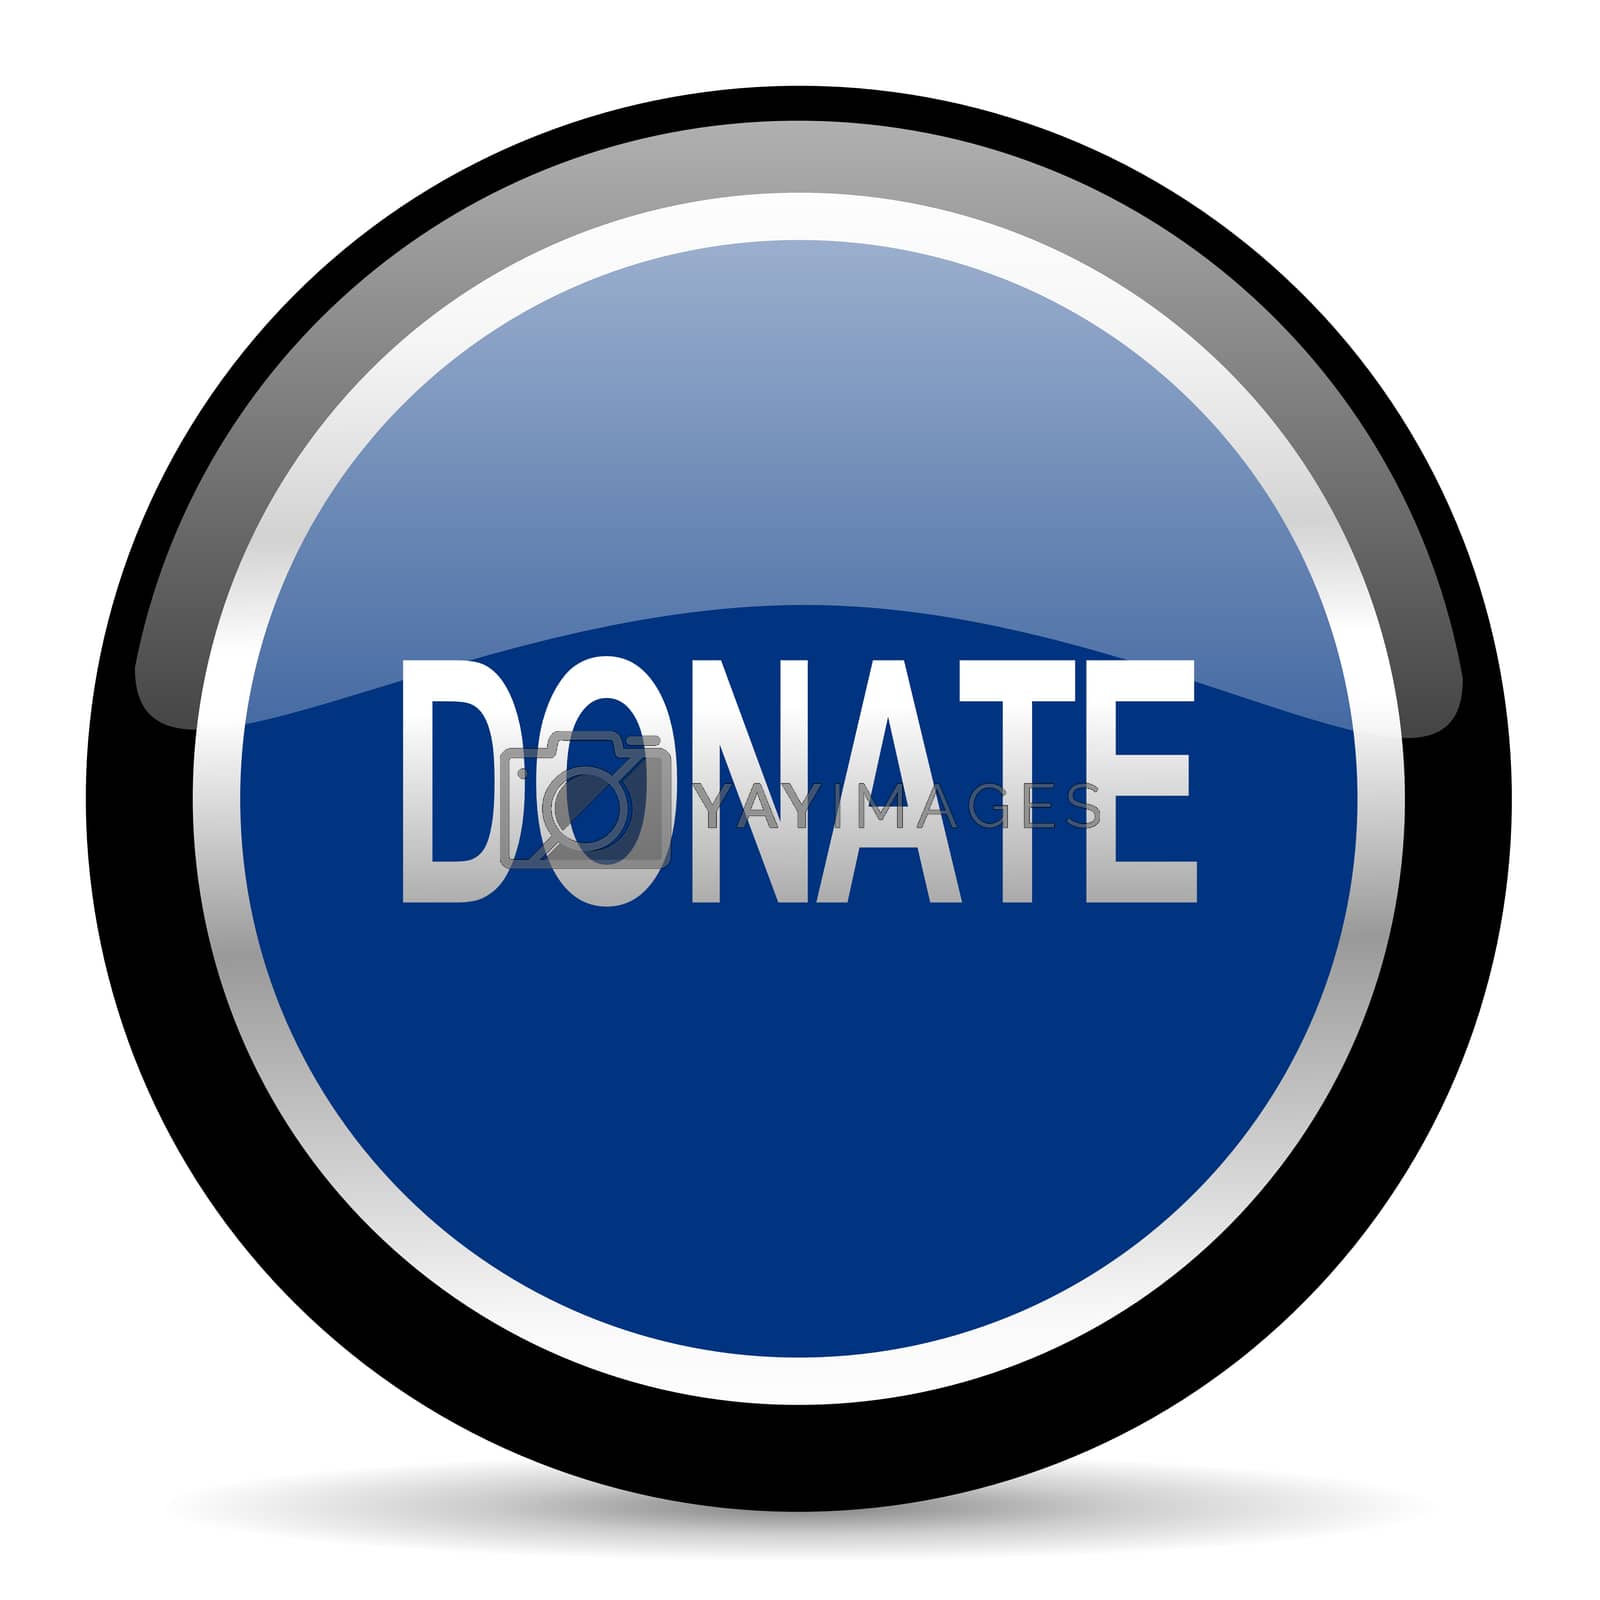 Royalty free image of donate icon by alexwhite